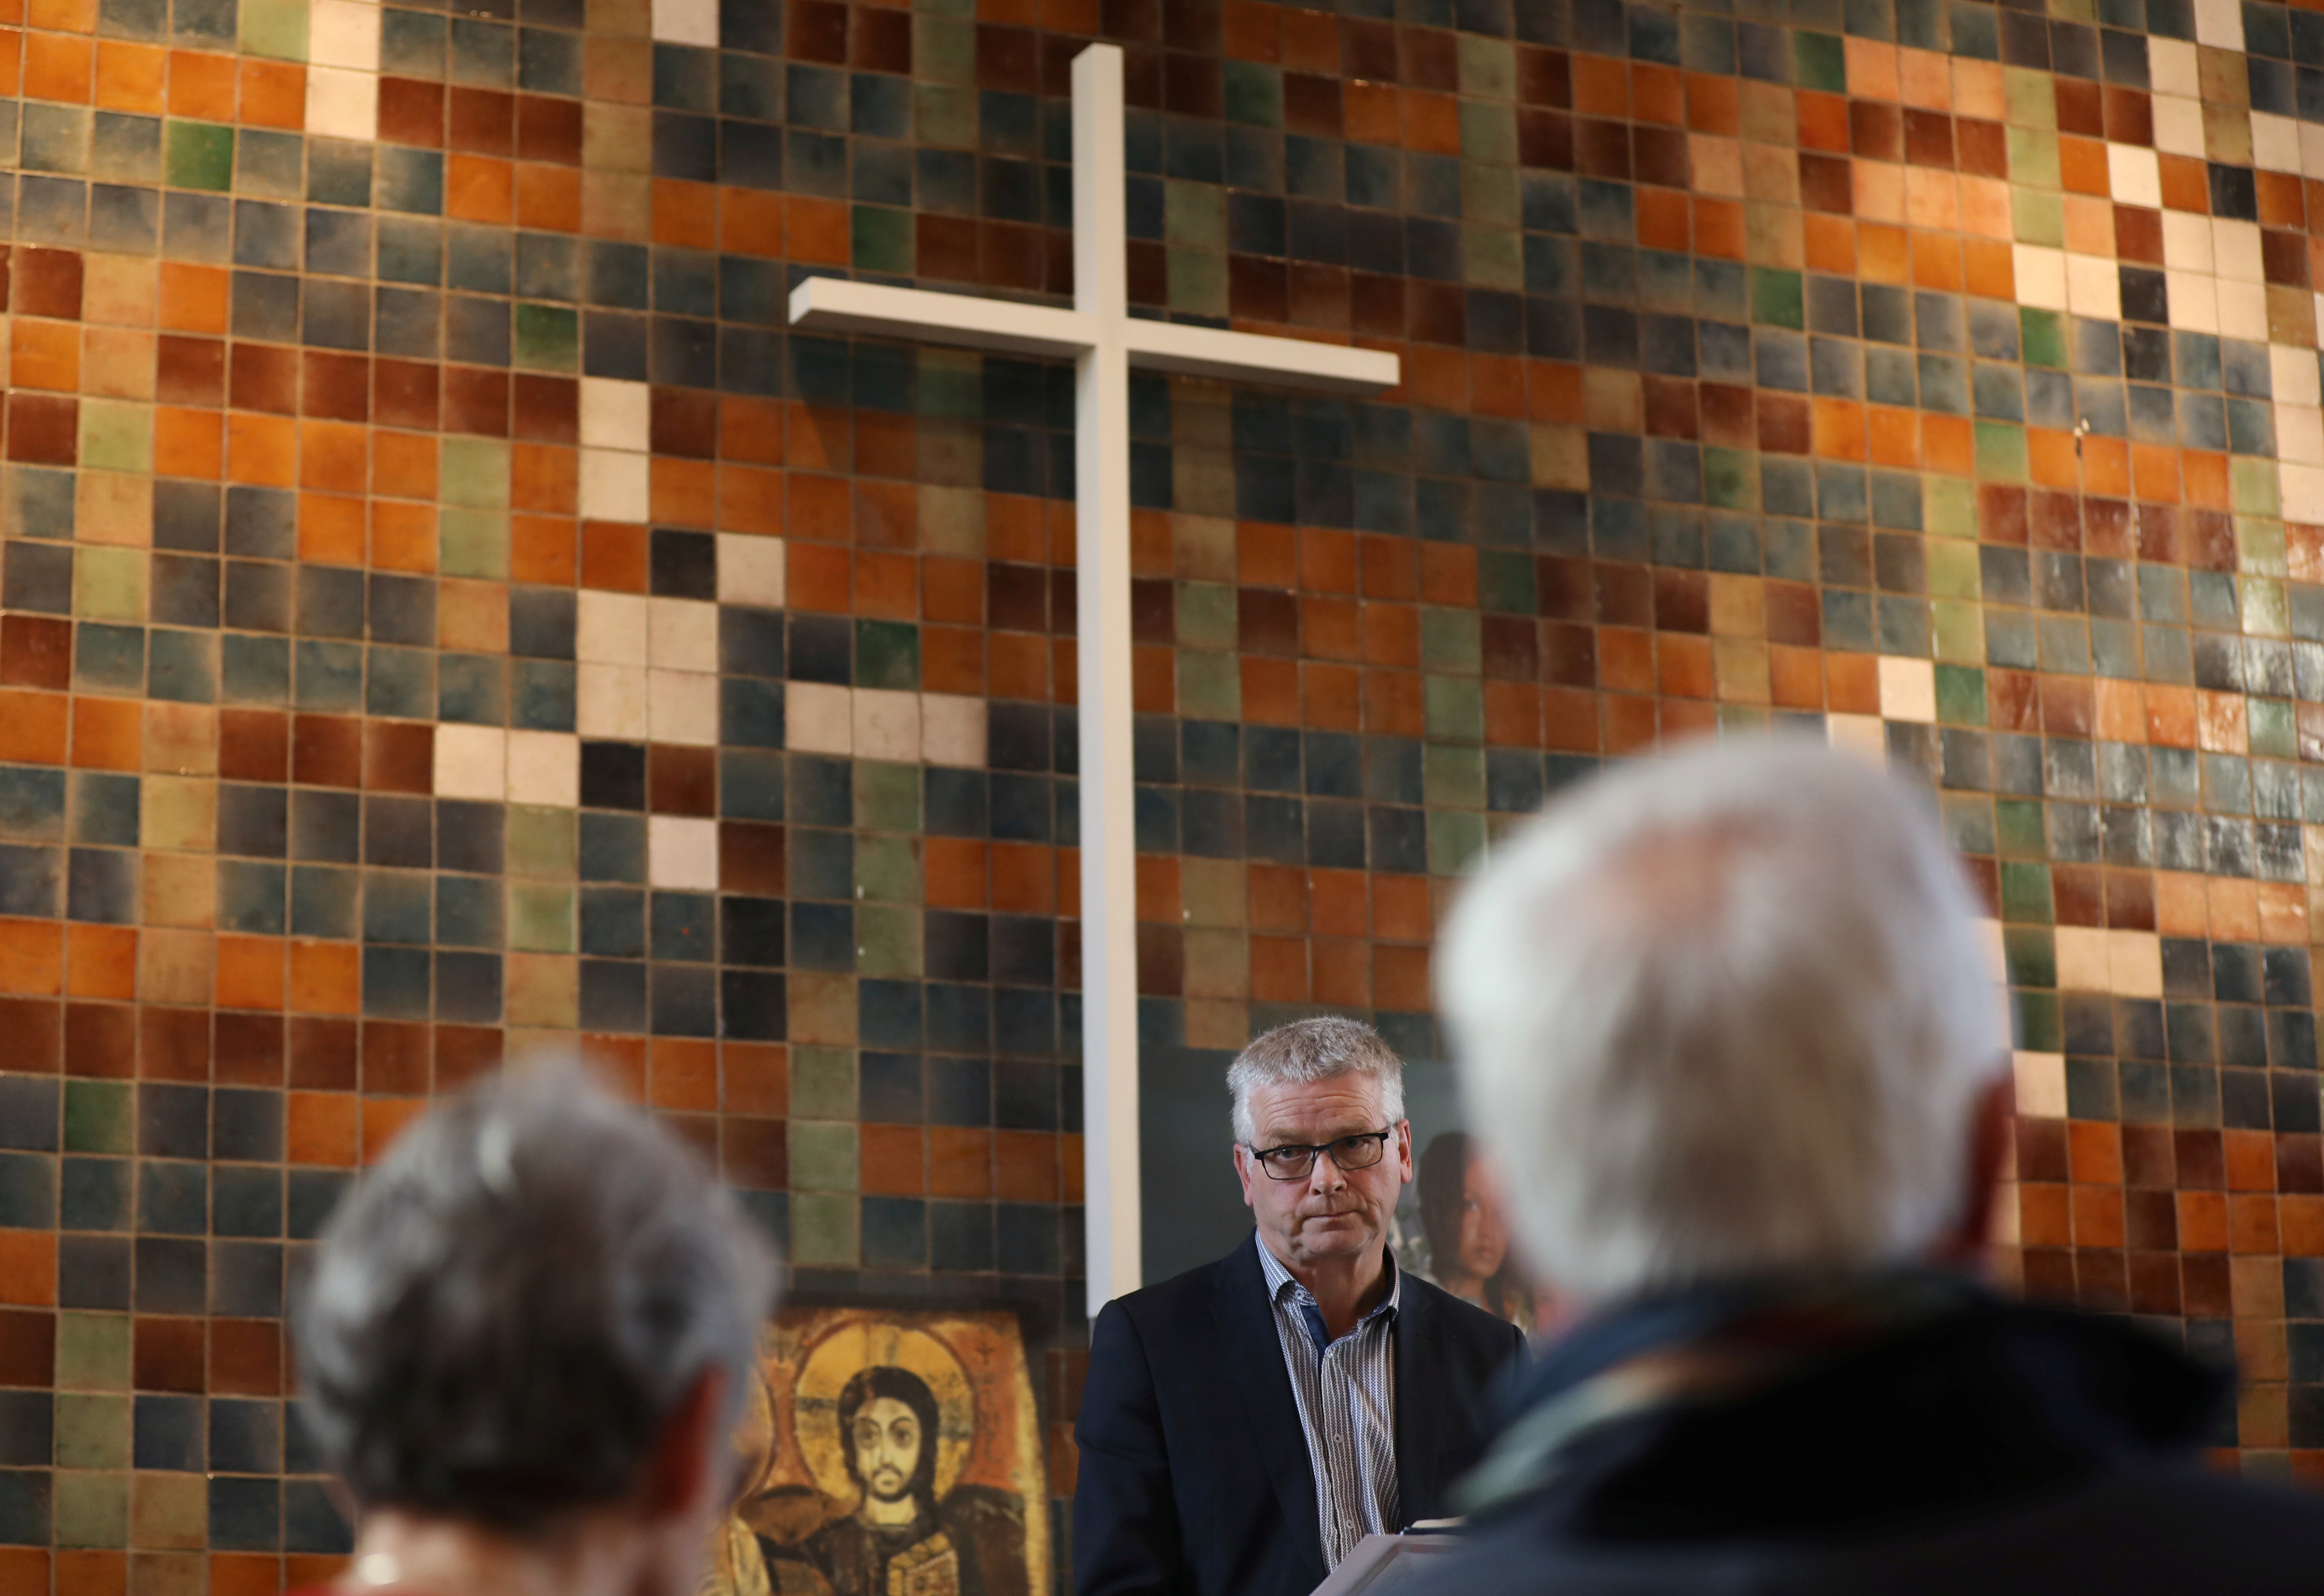 A Dutch church is holding a marathon service to block a family’s Christmas deportation